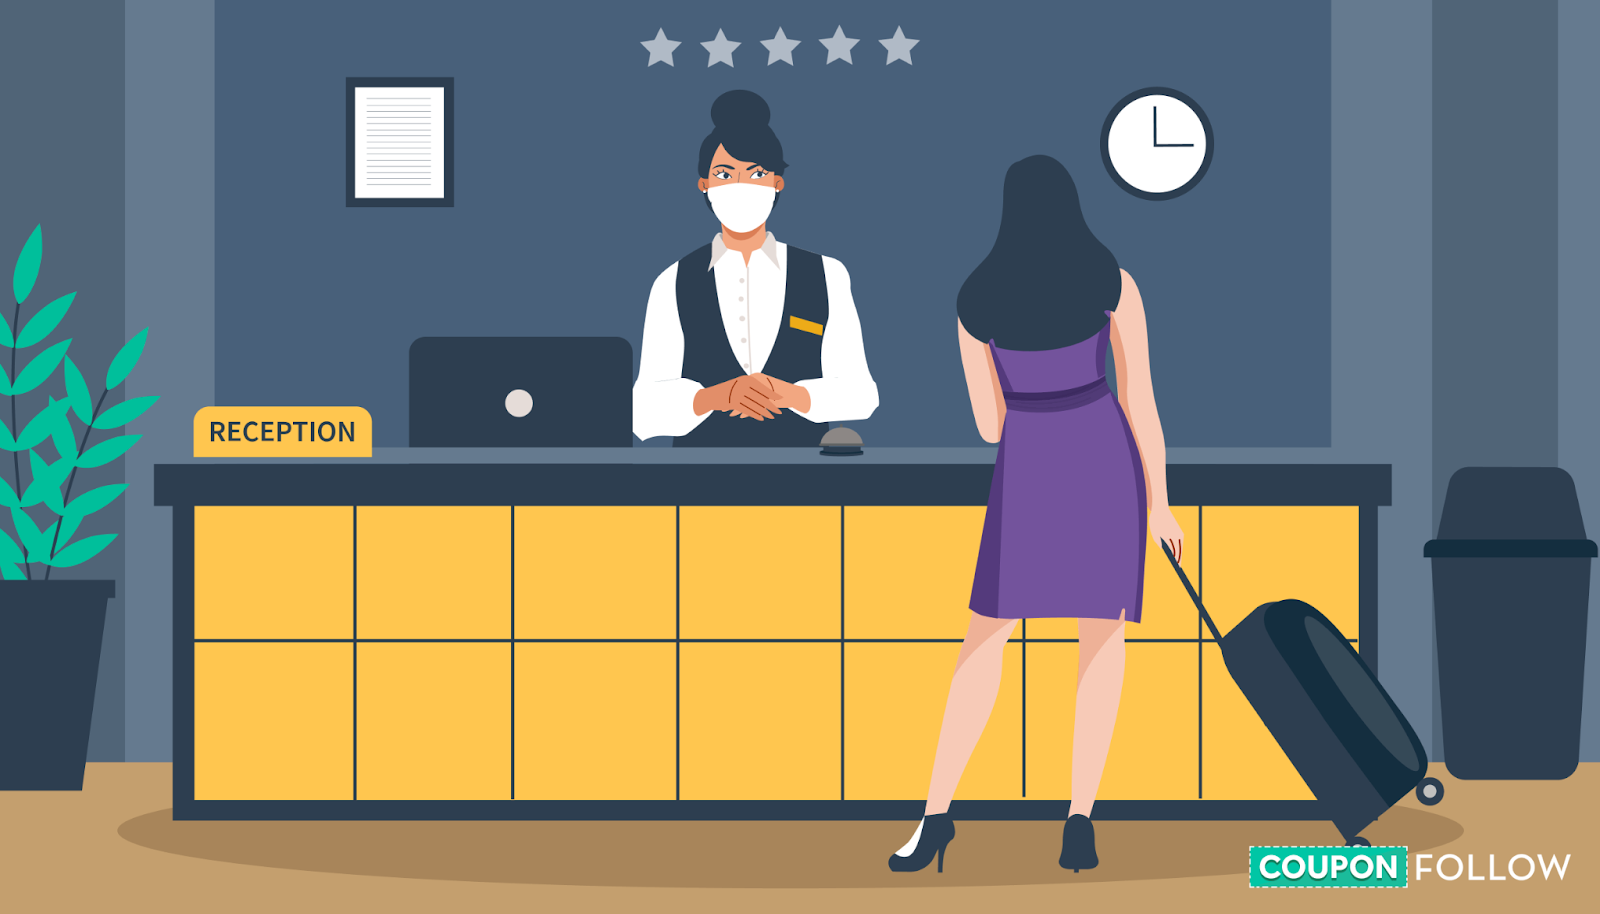 Illustration of student at hotel check-in